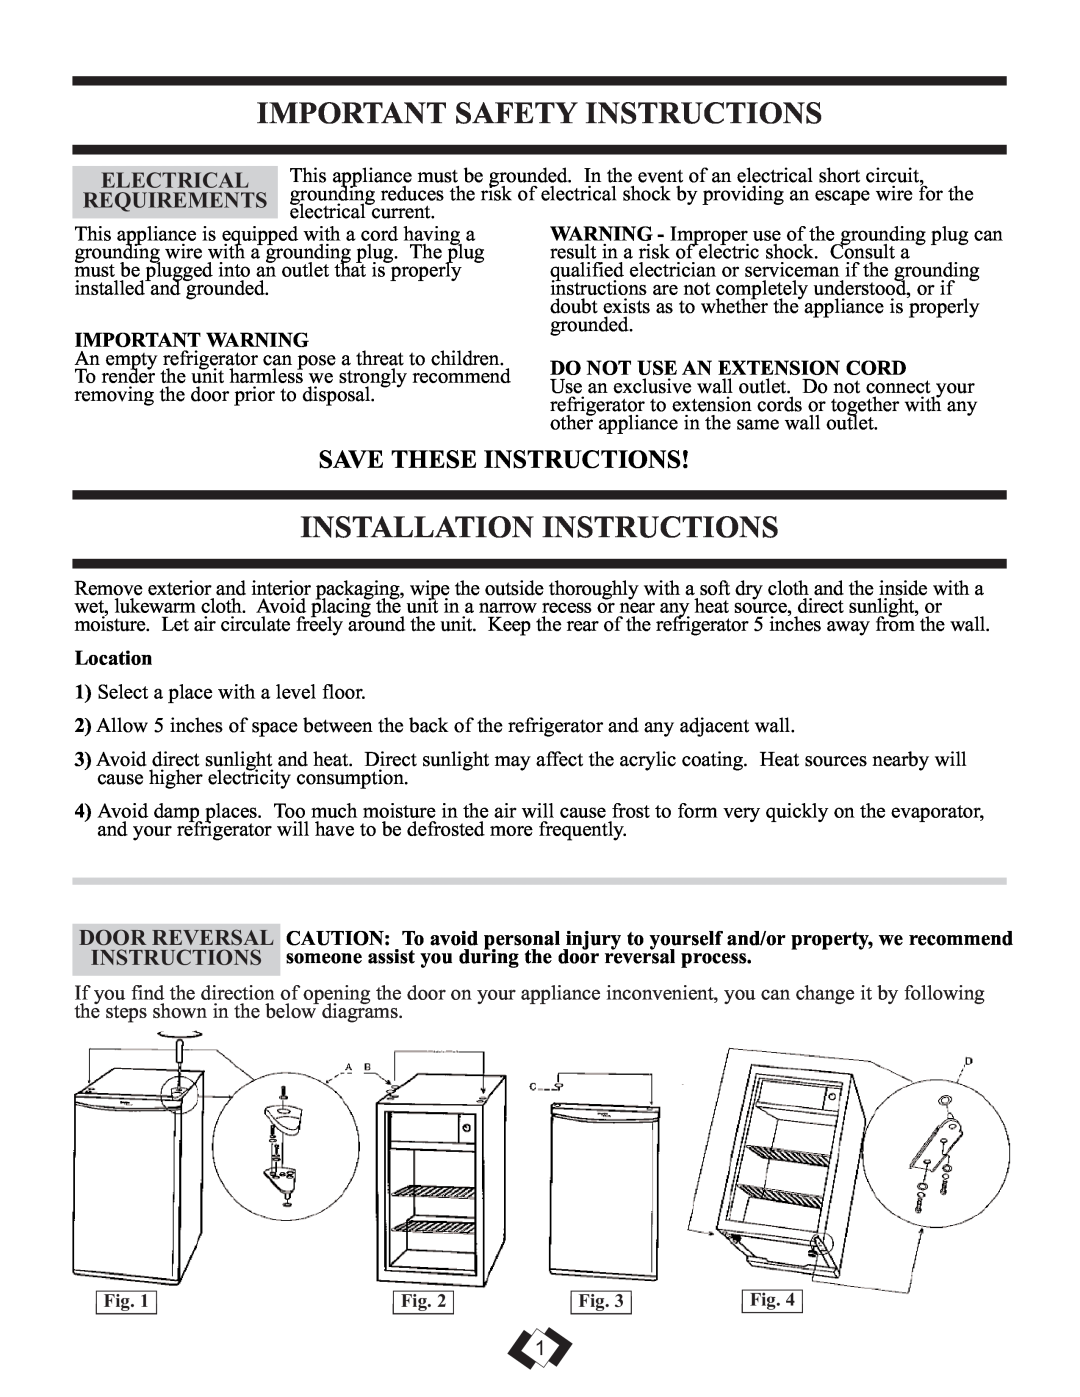 Danby DCRM71BLDB Important Safety Instructions, Installation Instructions, Save These Instructions, Electrical, Location 